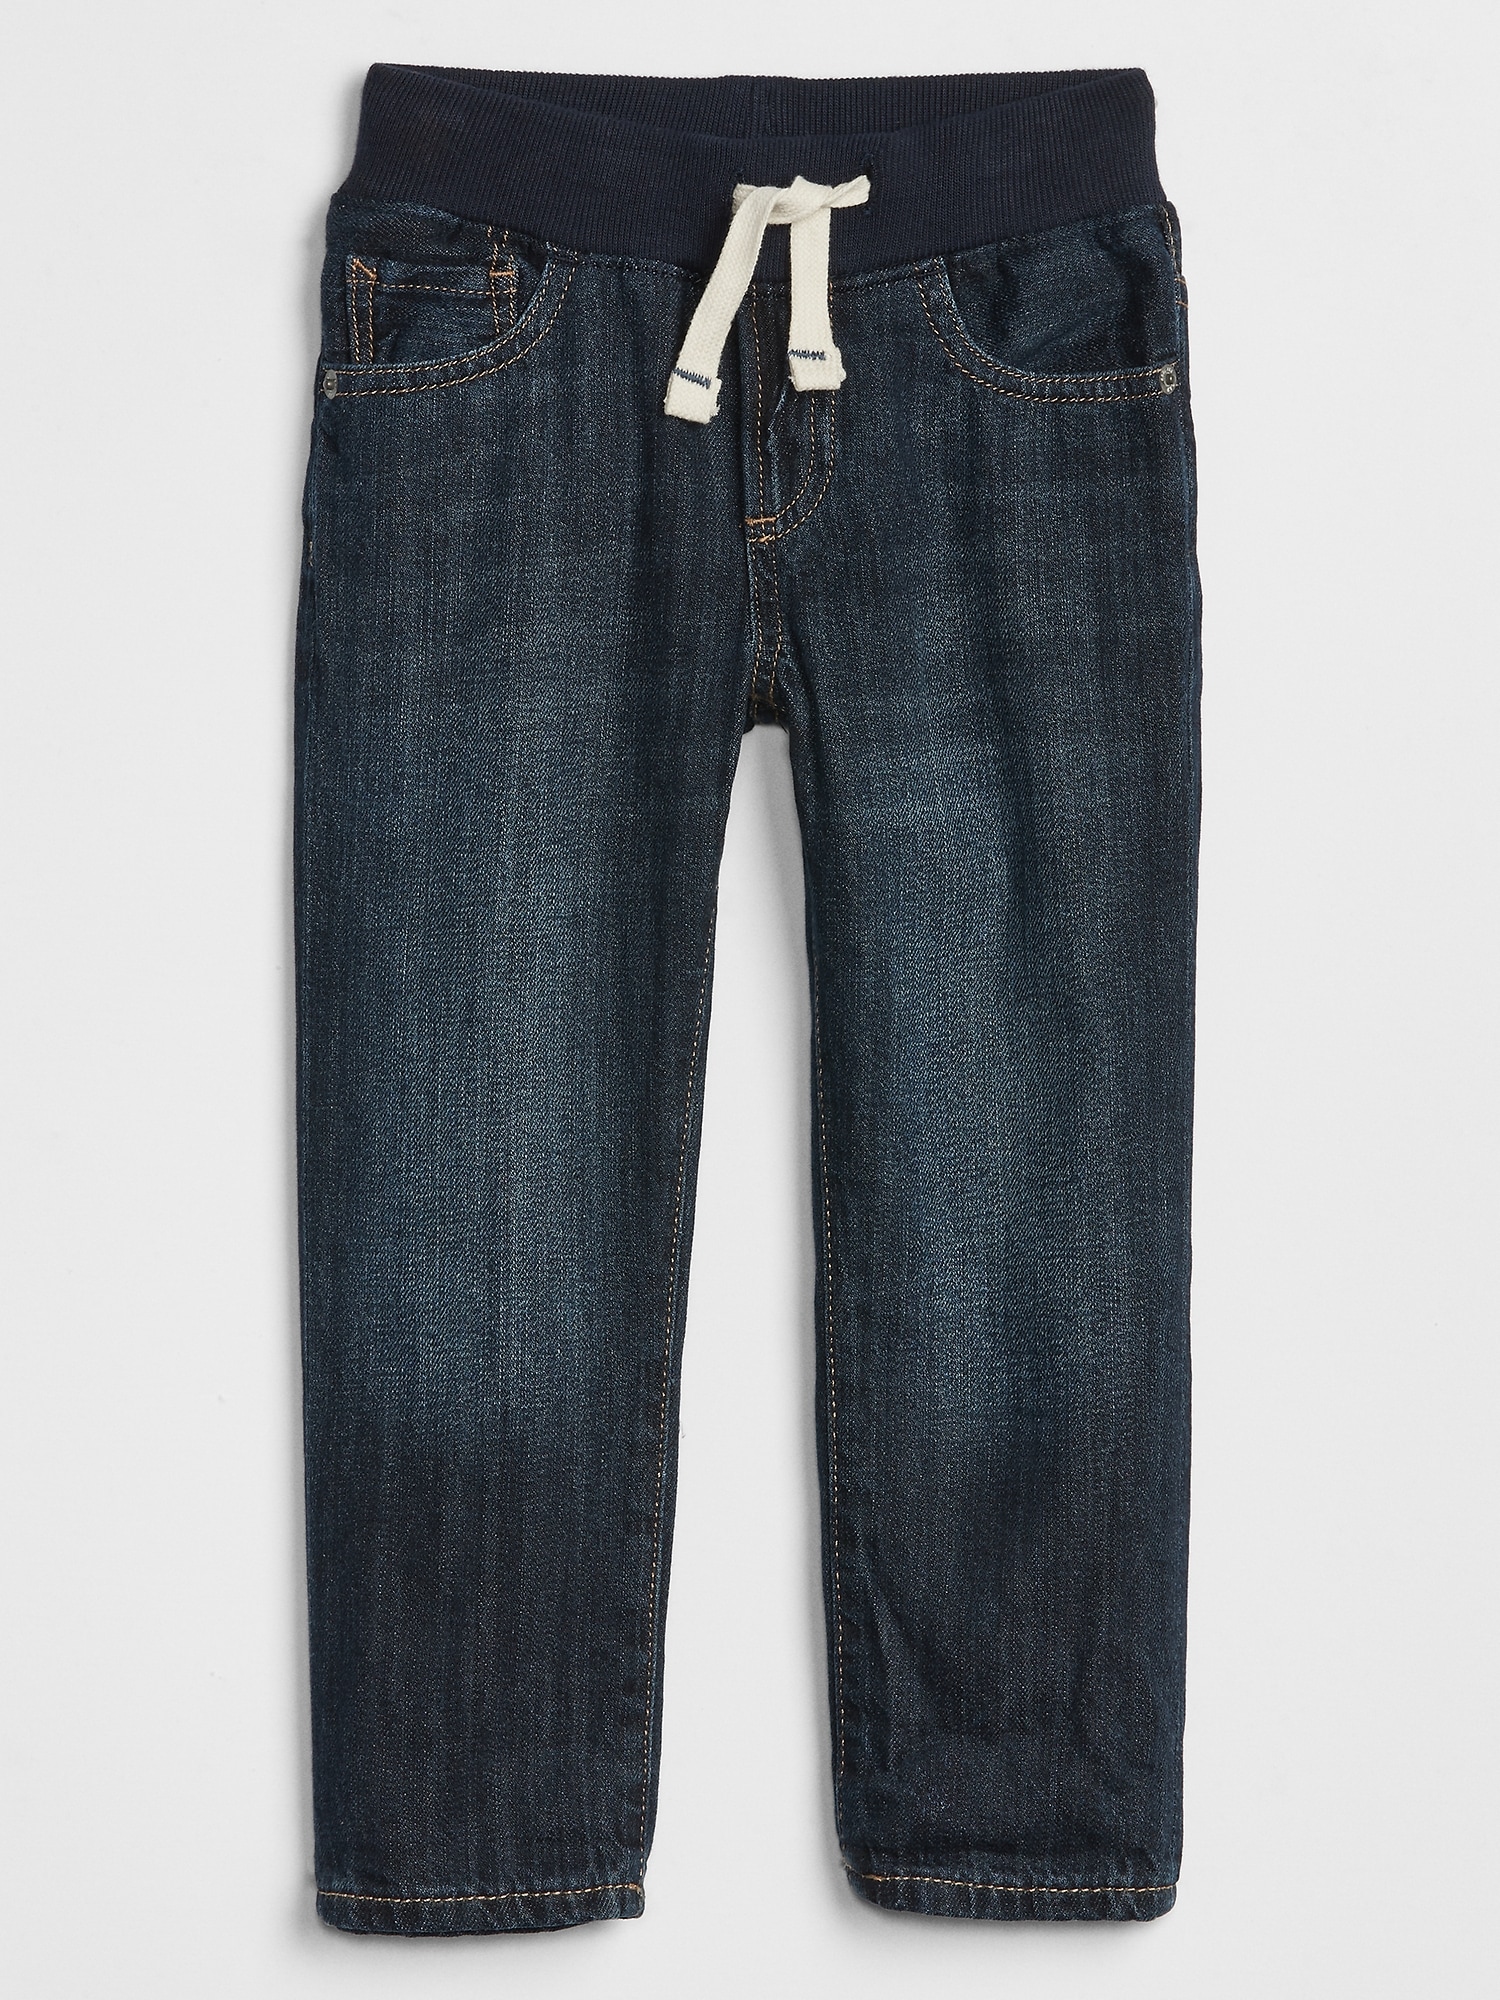 Toddler Pull-On Slim Jeans with Washwell | Gap Factory